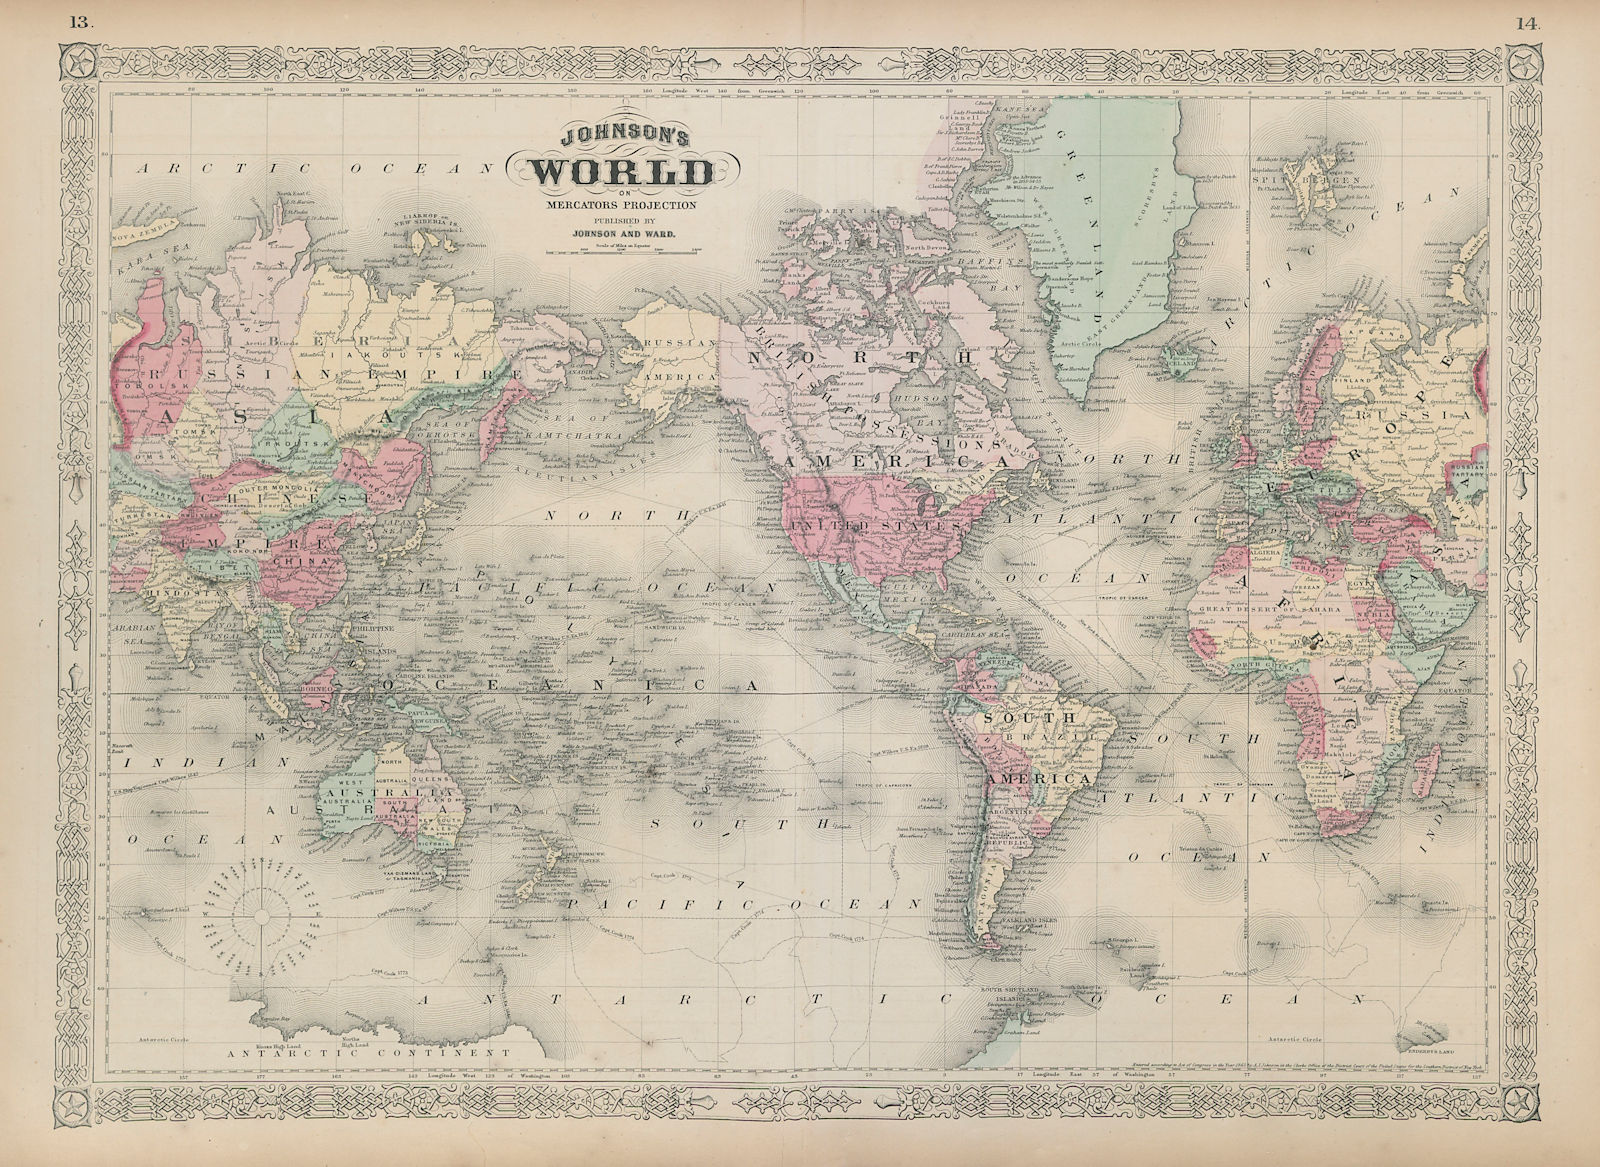 Johnson's World on Mercator's Projection. Americas-centric 1865 old map